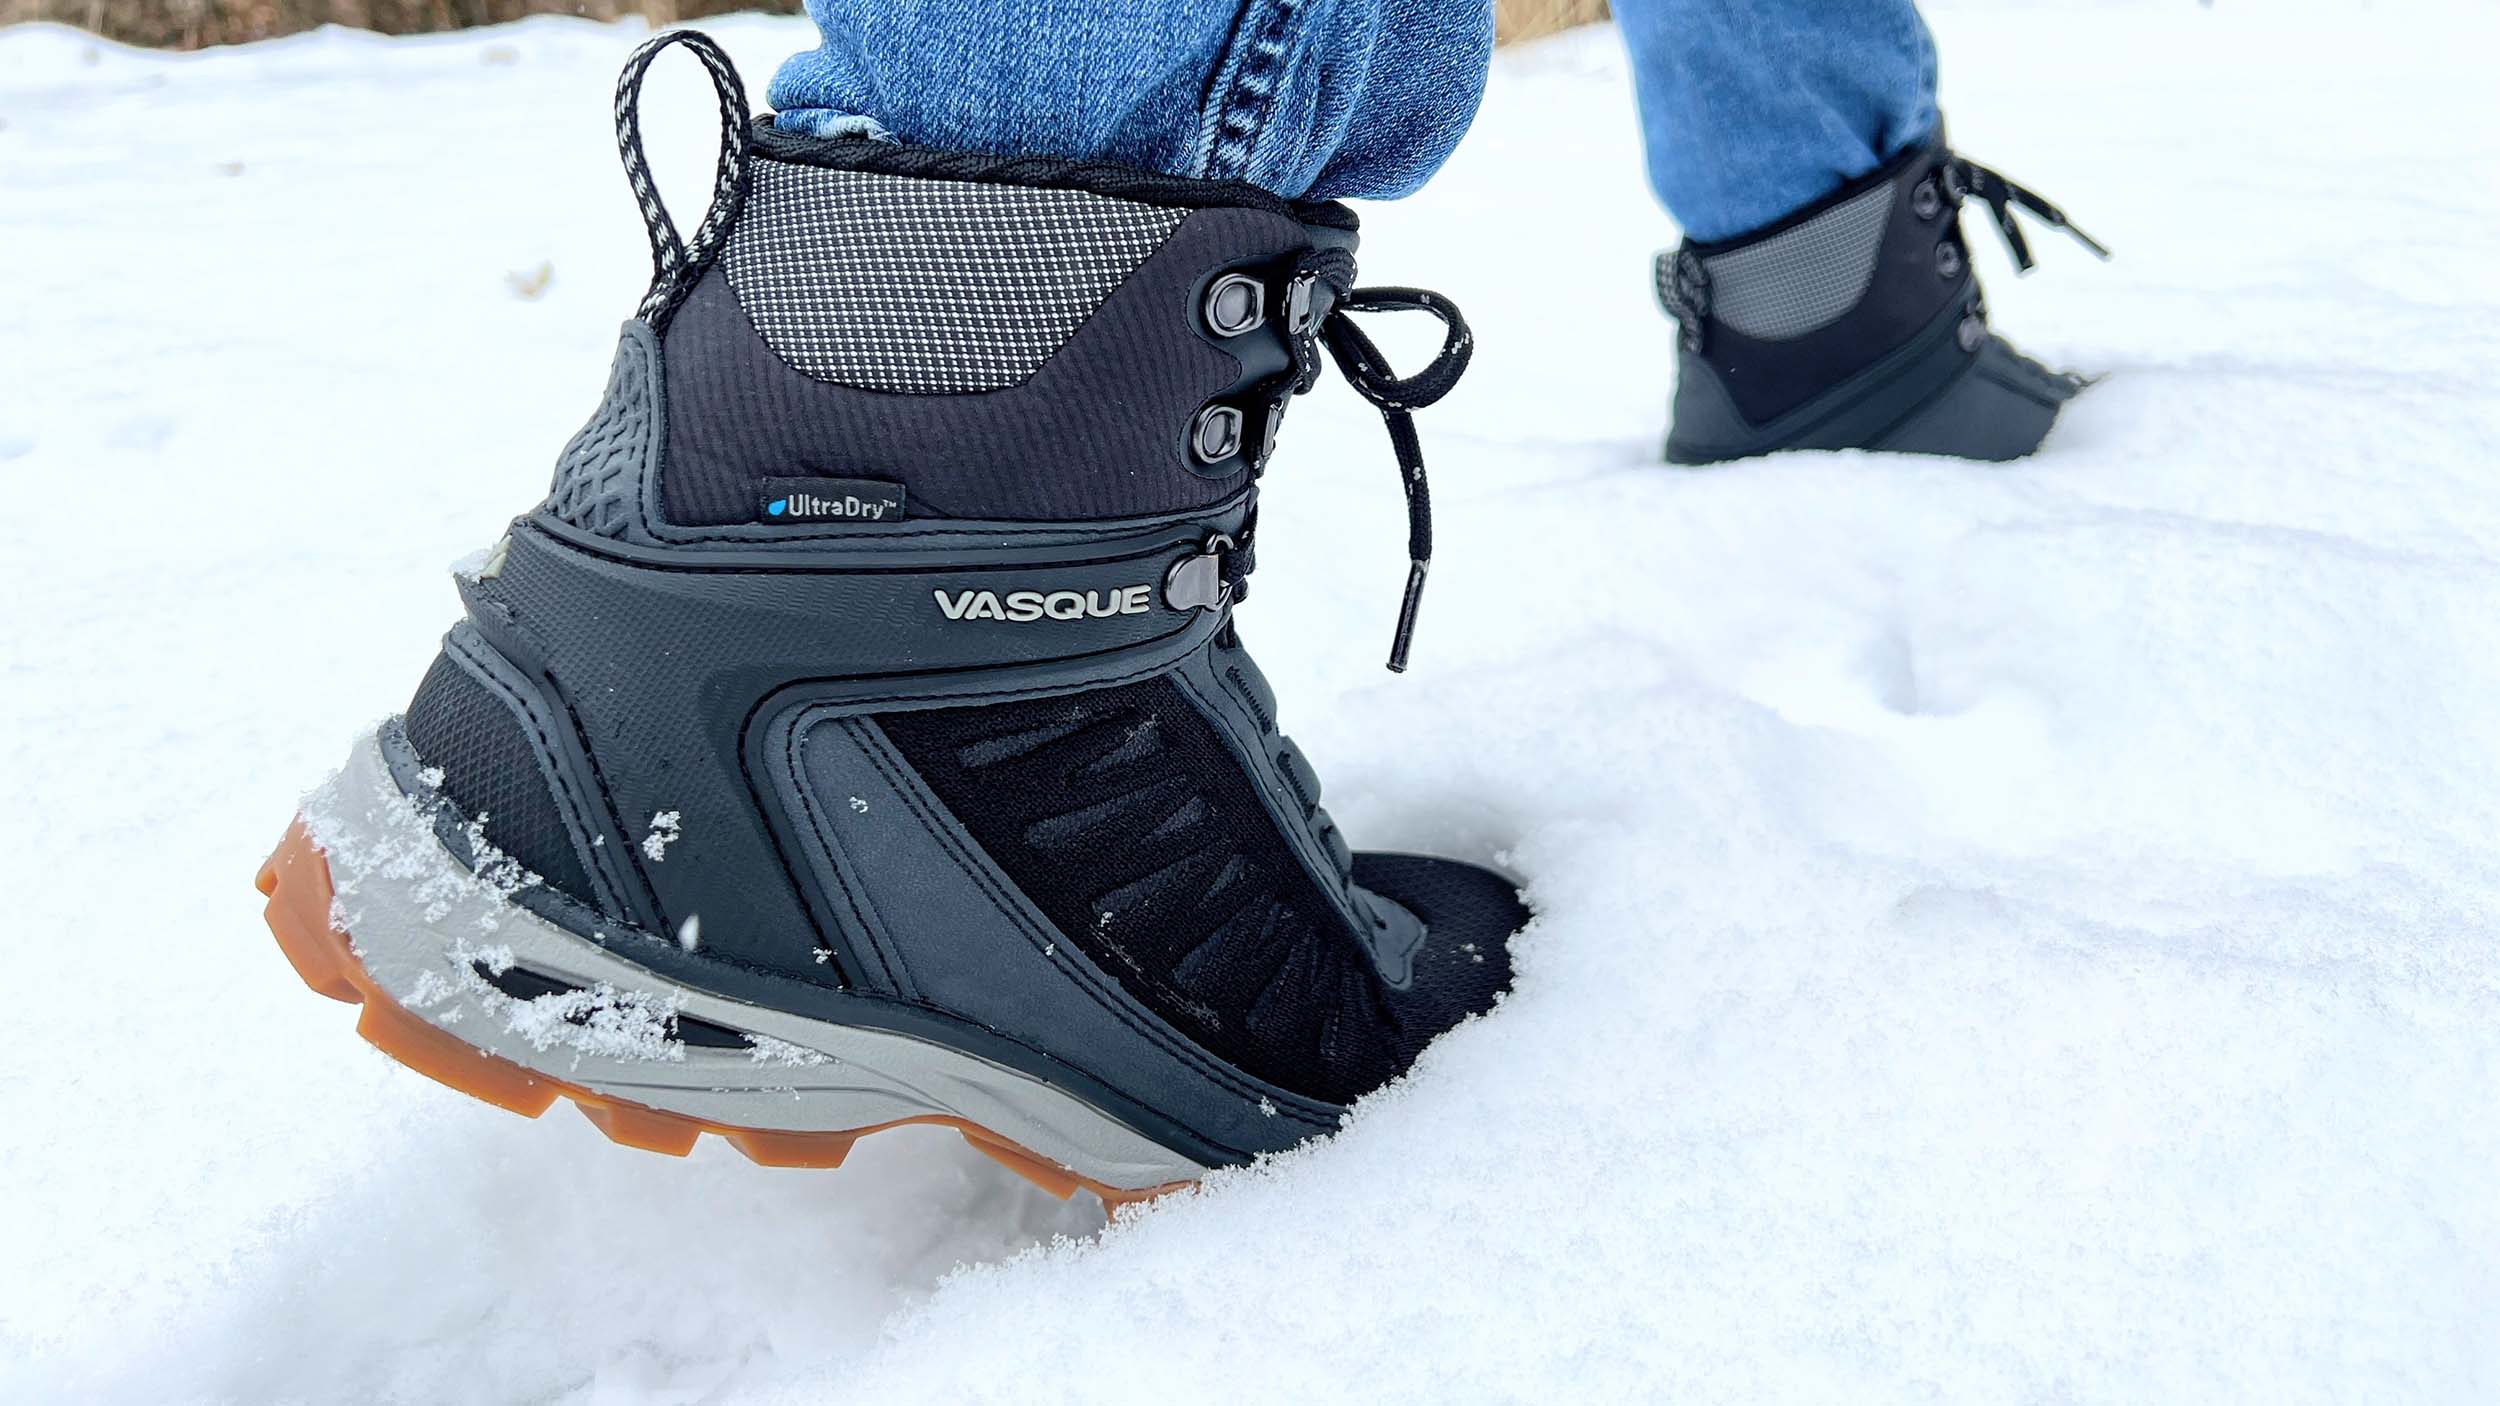 Tips For Choosing Winter Boots Wisely